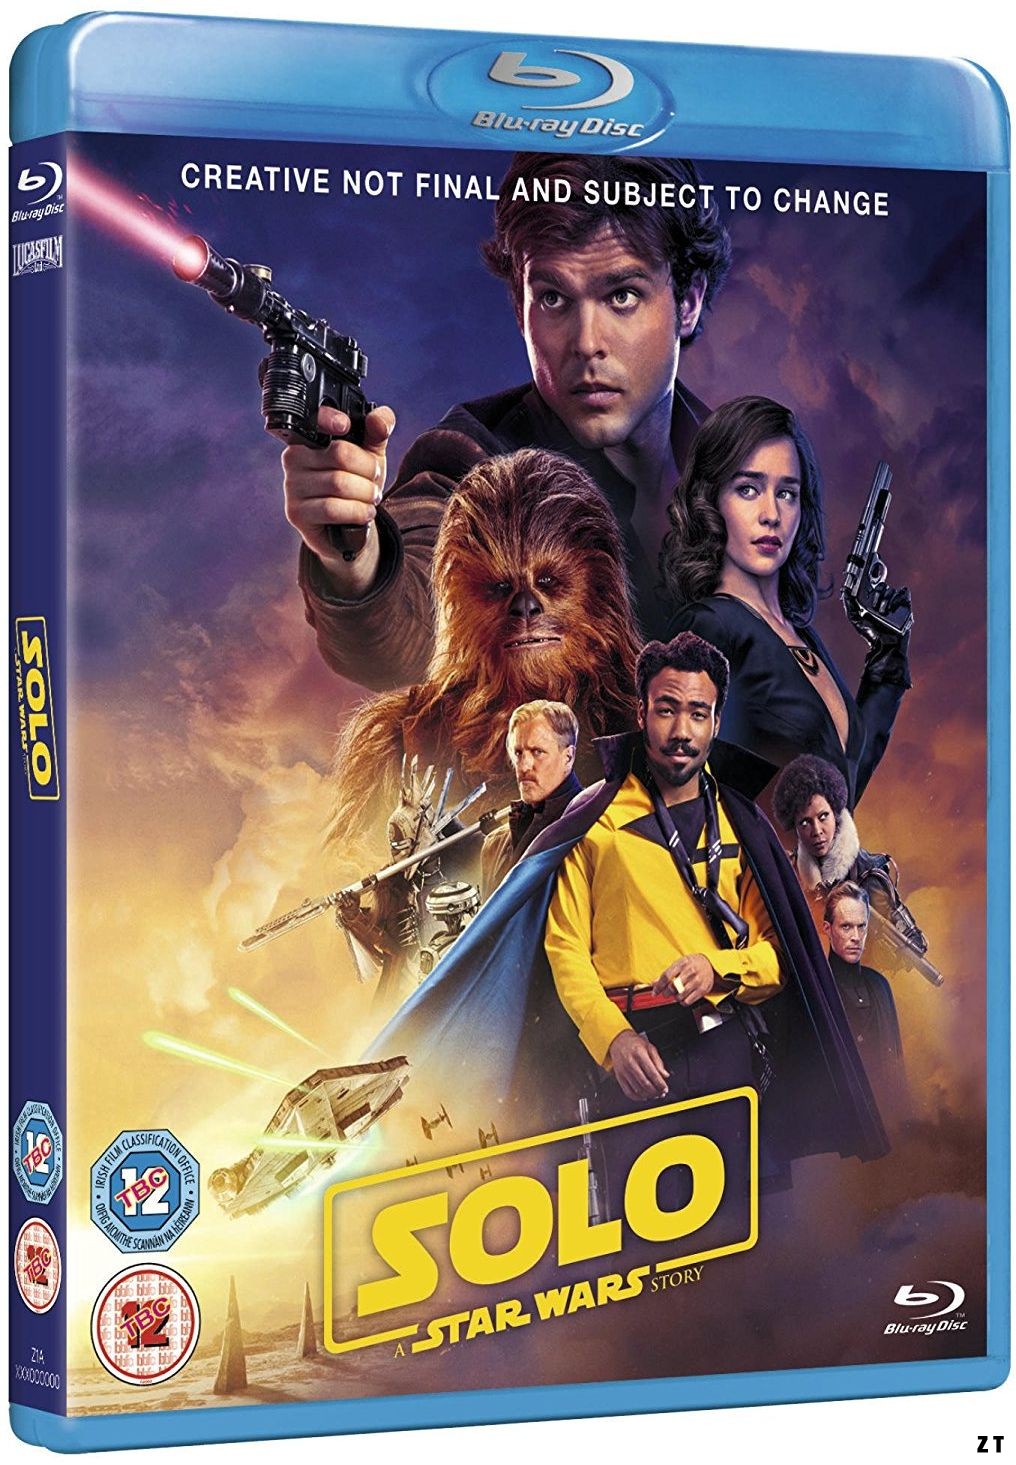 Solo: A Star Wars Story Blu-Ray 720p TrueFrench